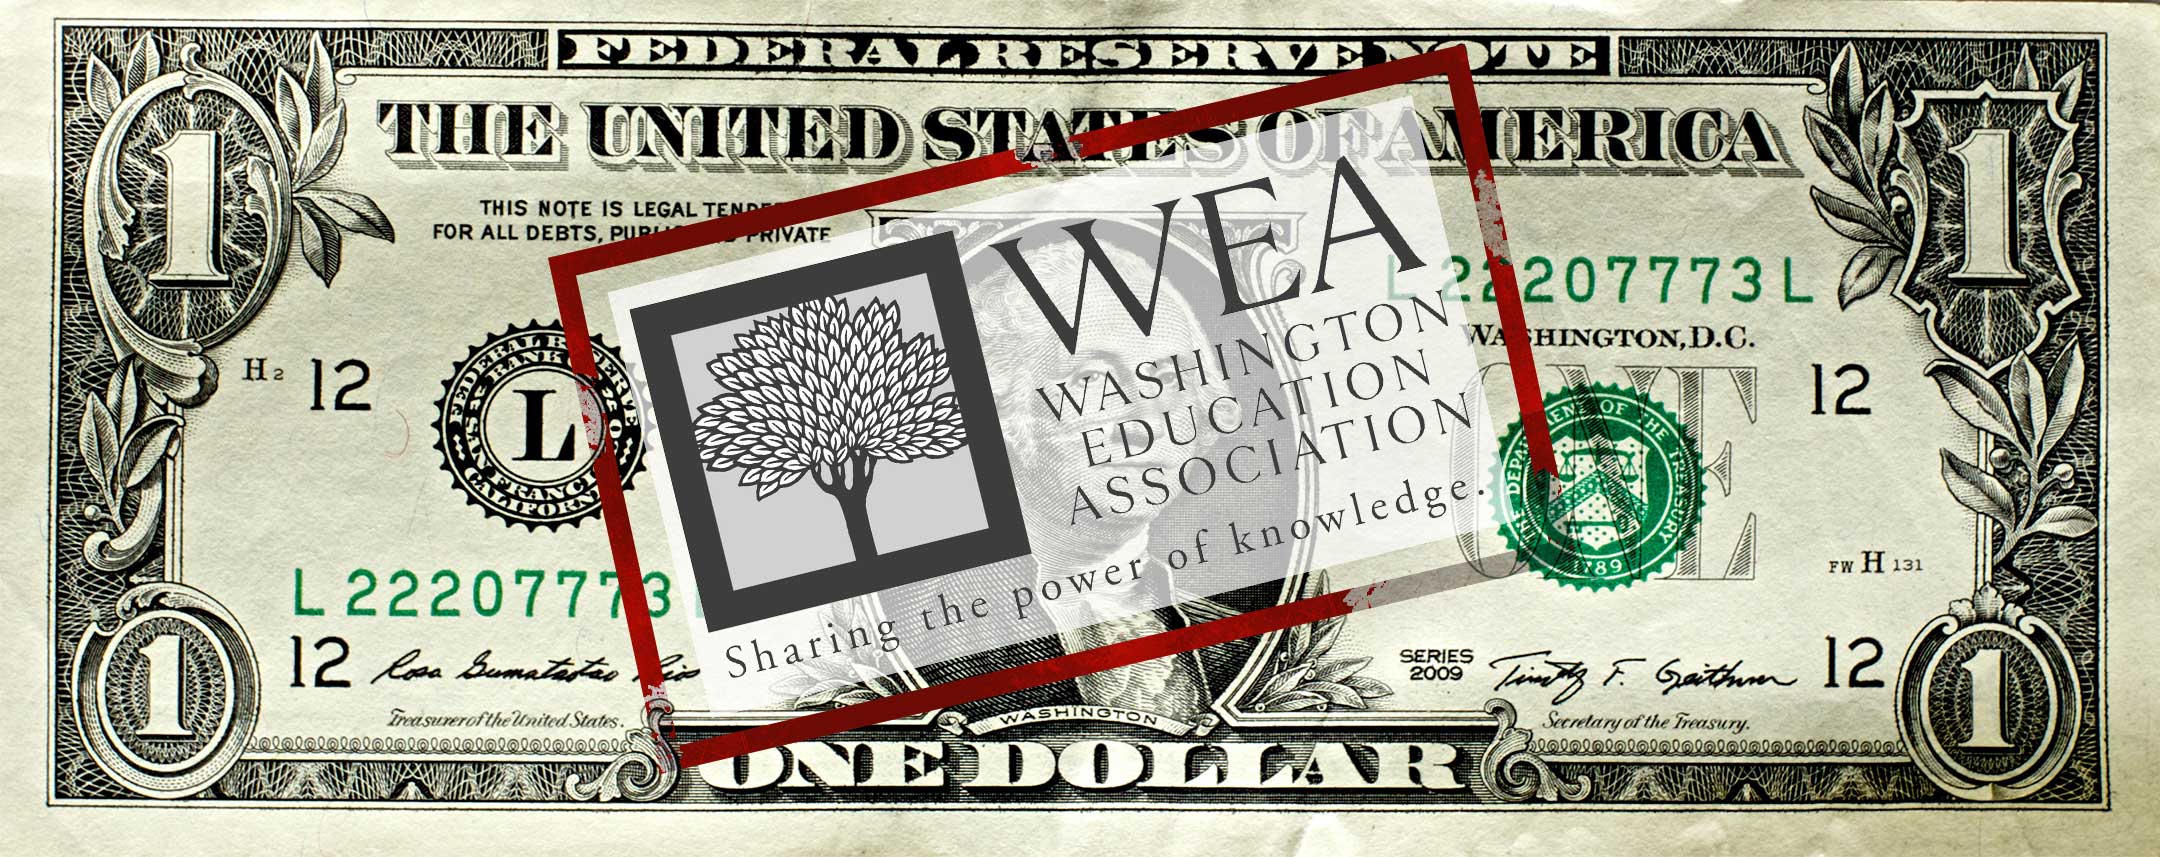 How-Much-Is-WEA-Union-Dues.jpg